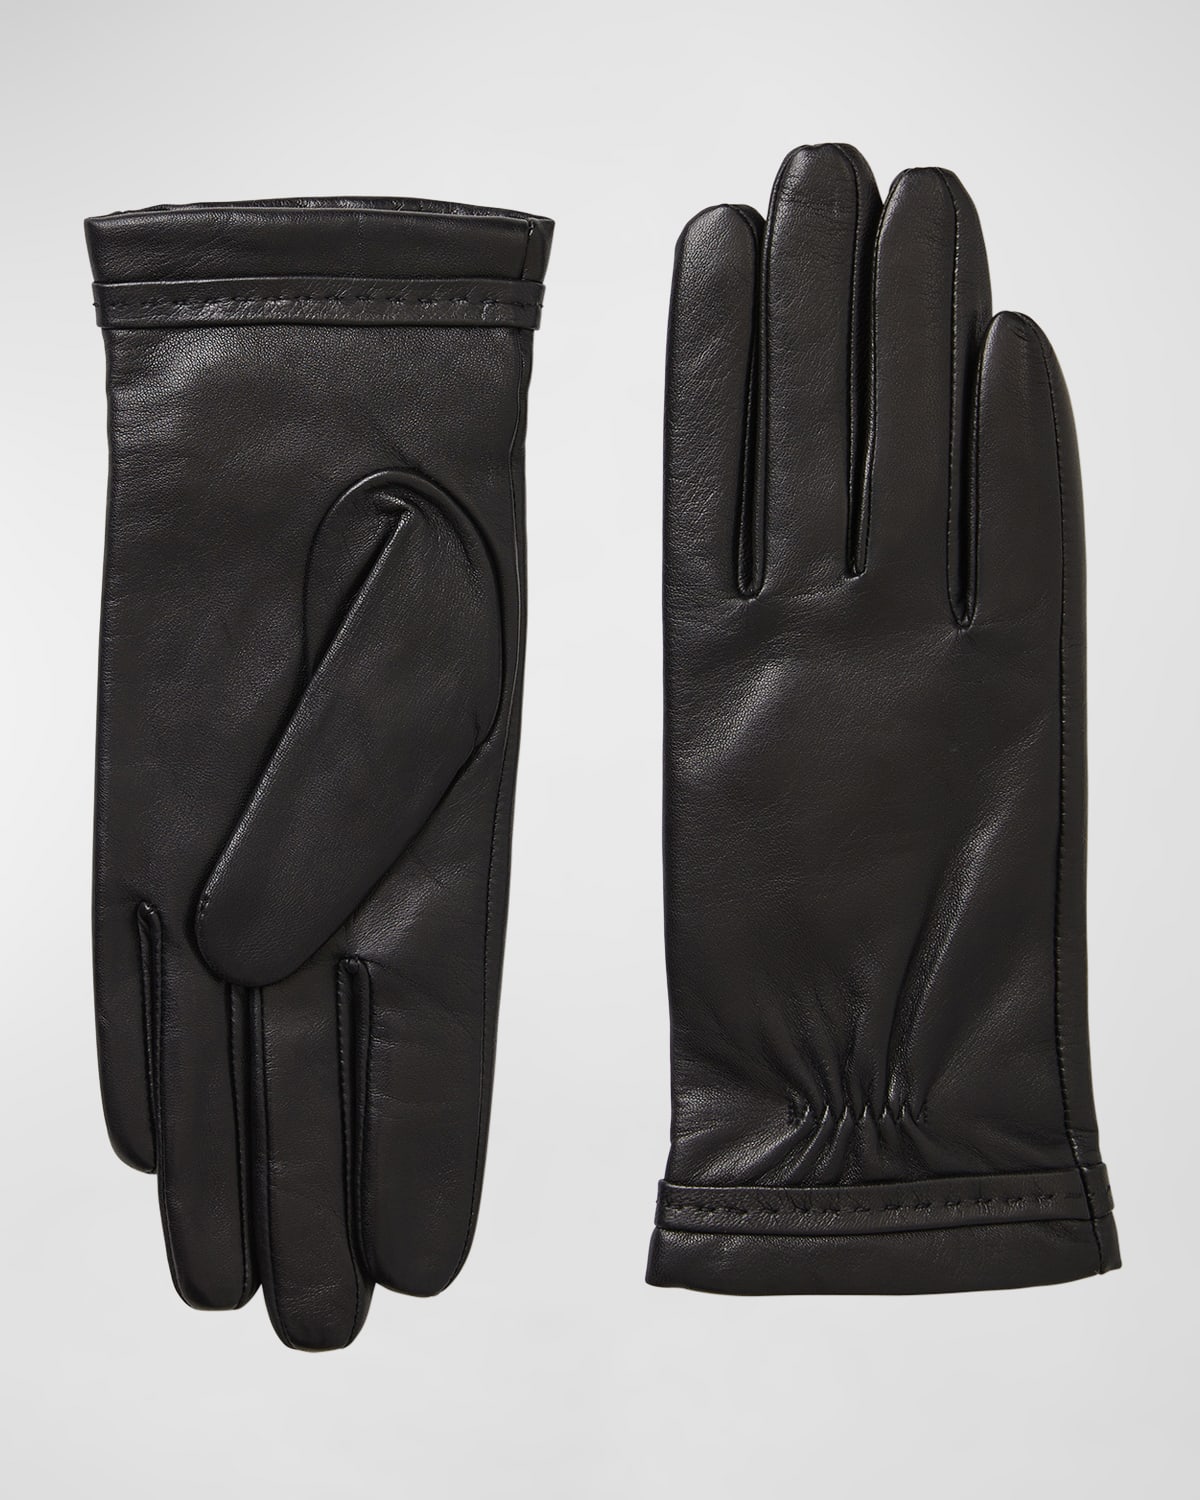 Nappa Leather Gloves With Stitched Cuffs